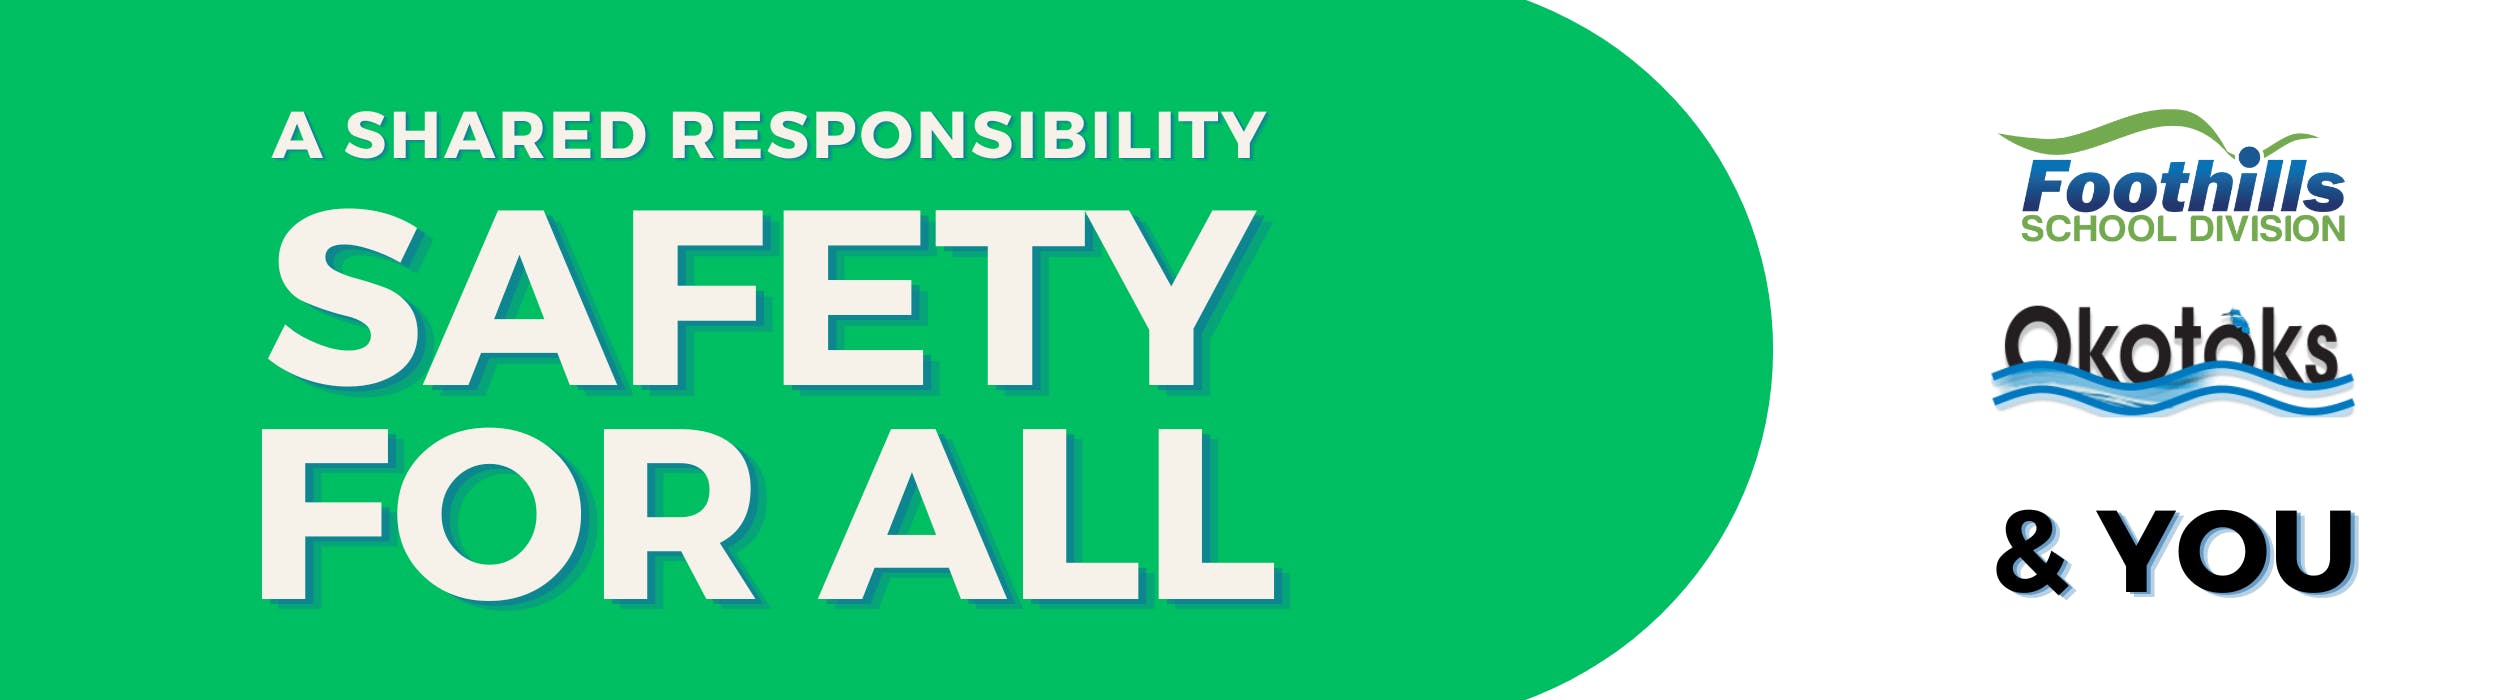 A Shared Responsibility: Safety for All . Town of Okotoks, Foothills School Division, & You